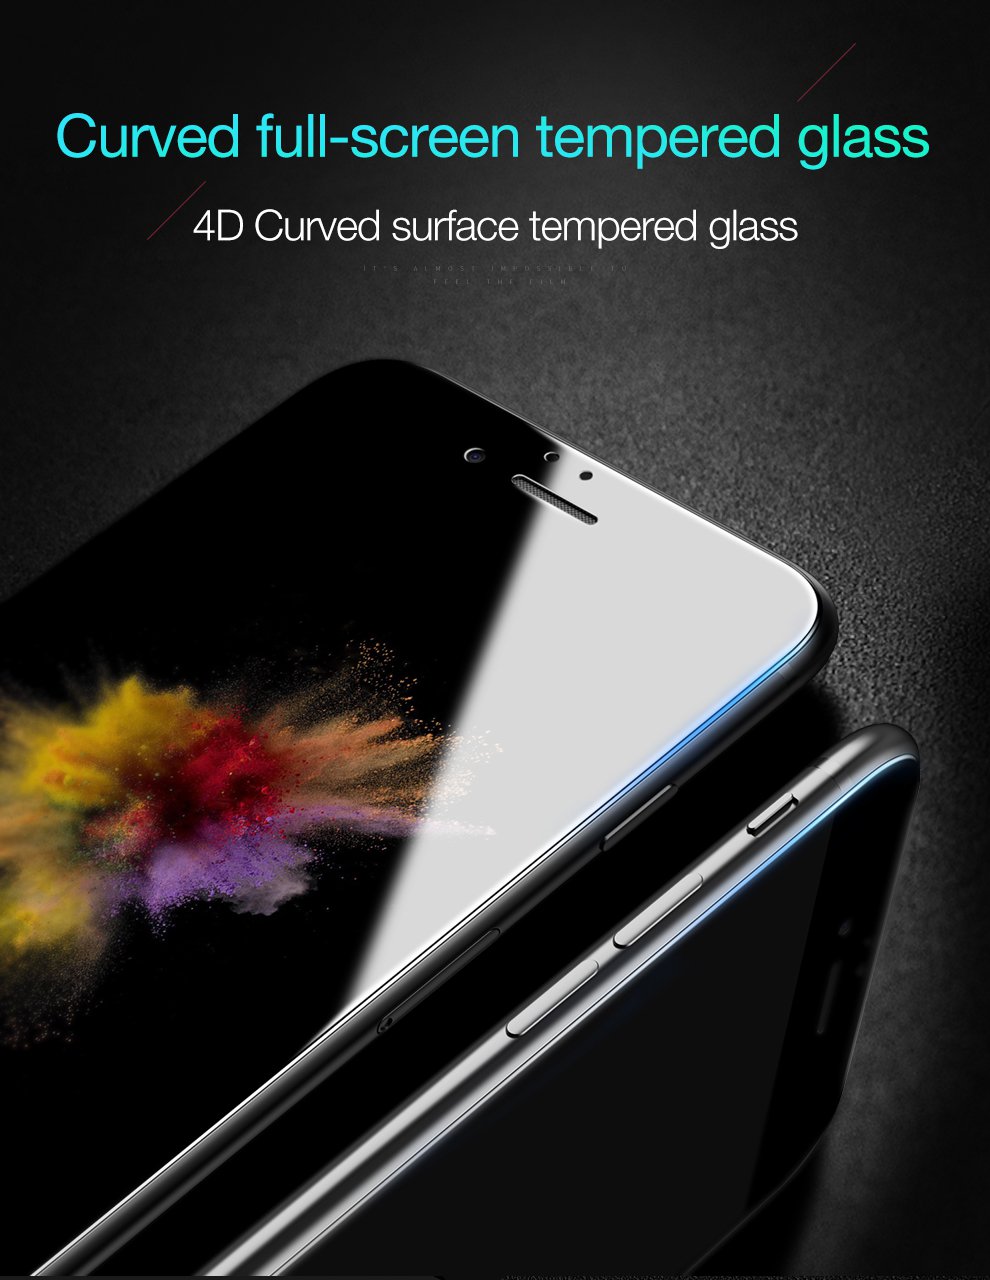 Bakeey-4D-Curved-Edge-Cold-Carving-Tempered-Glass-Screen-Protector-For-iPhone-7-Plus-55-Inch-1184842